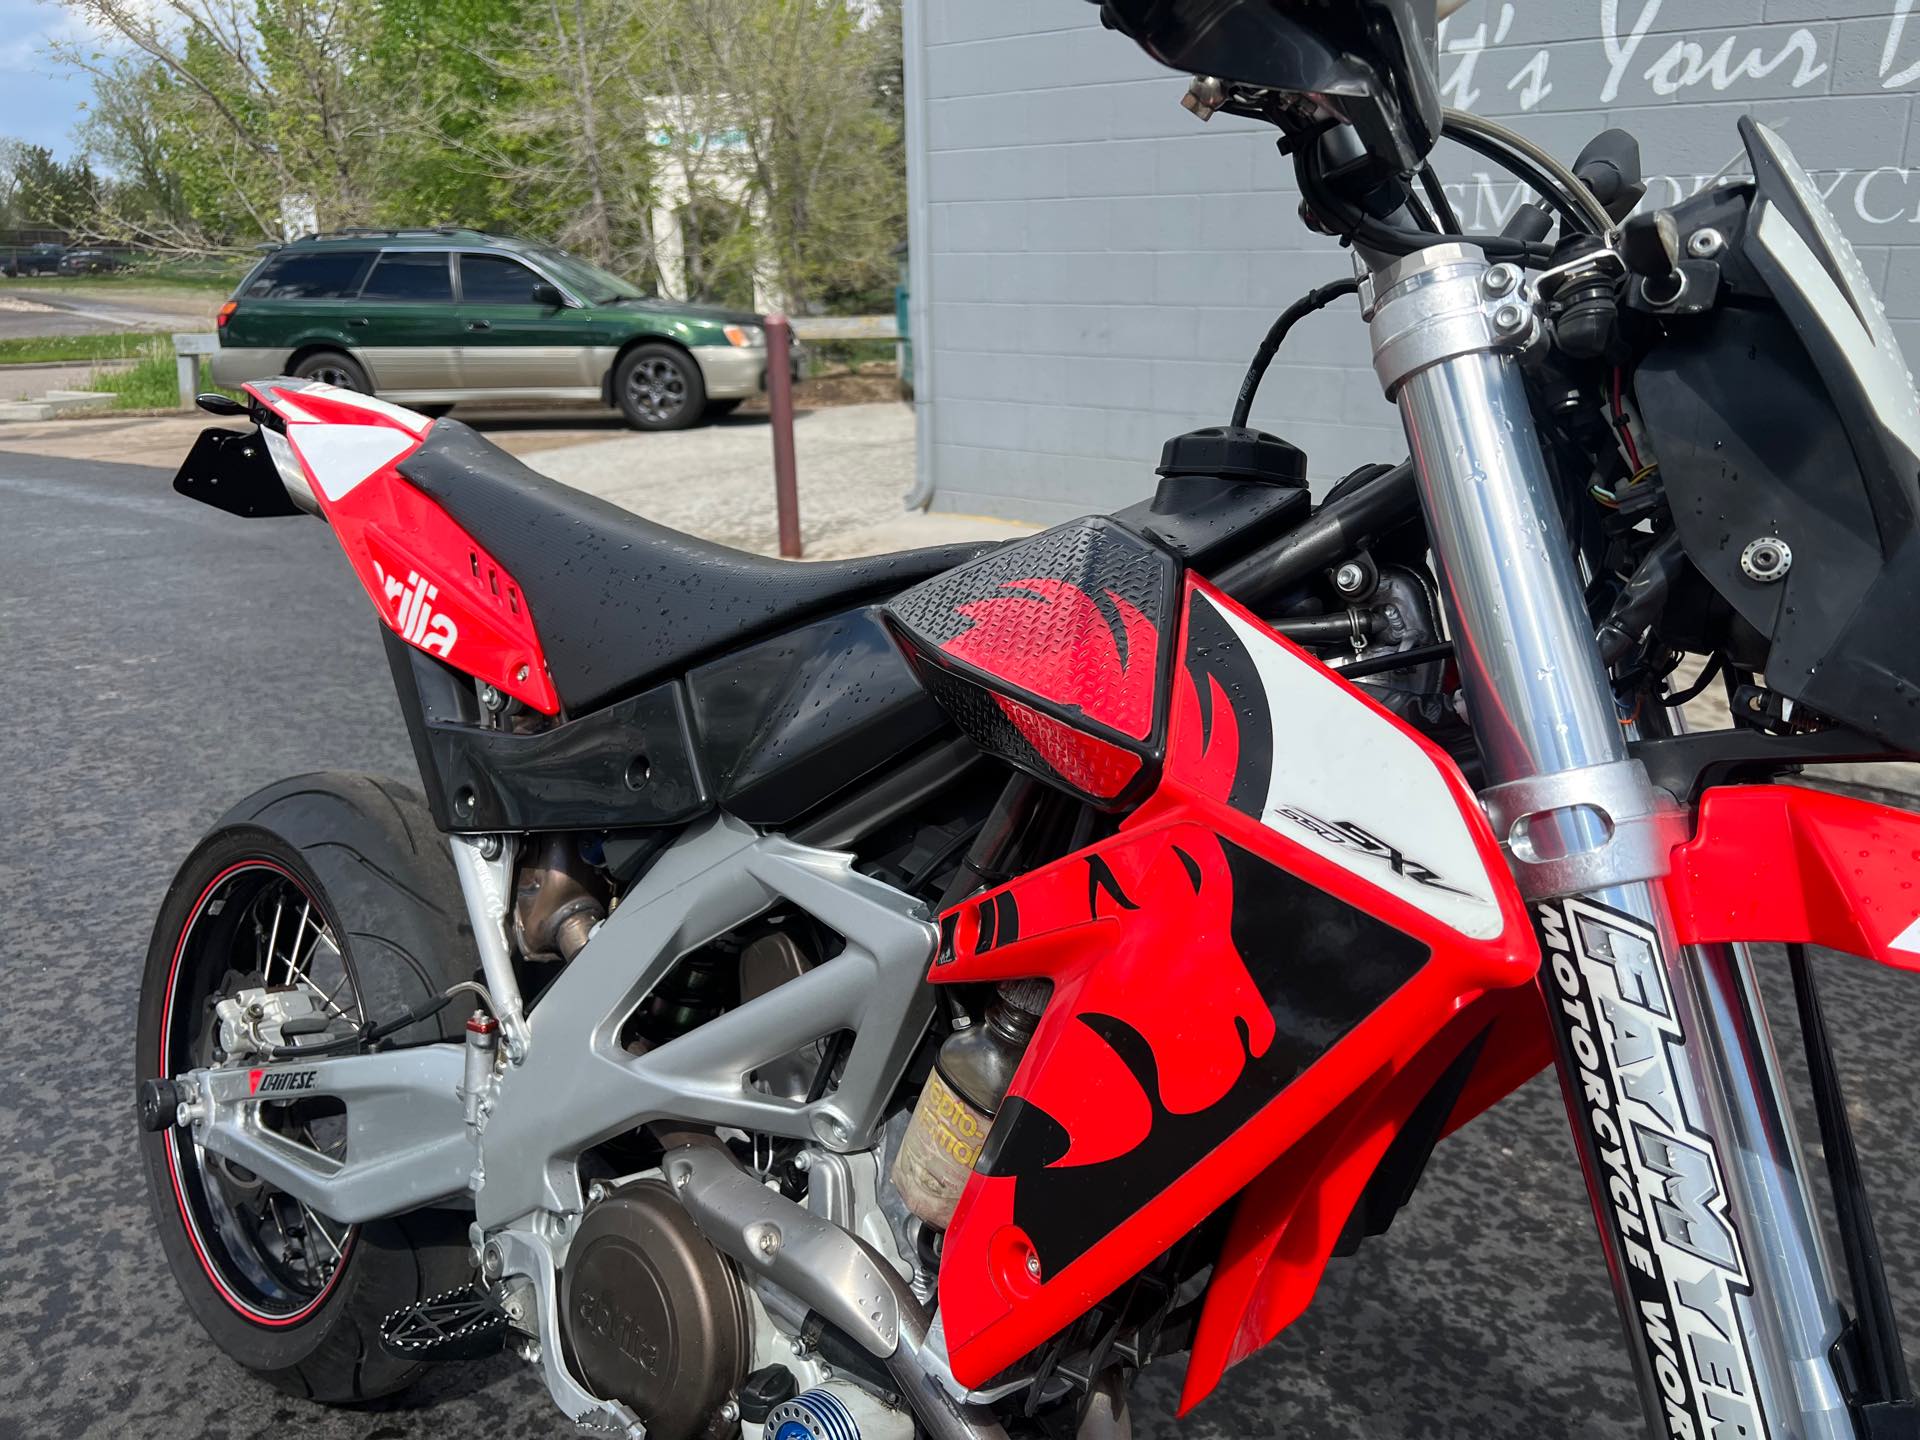 2007 Aprilia SXV 5.5 at Aces Motorcycles - Fort Collins